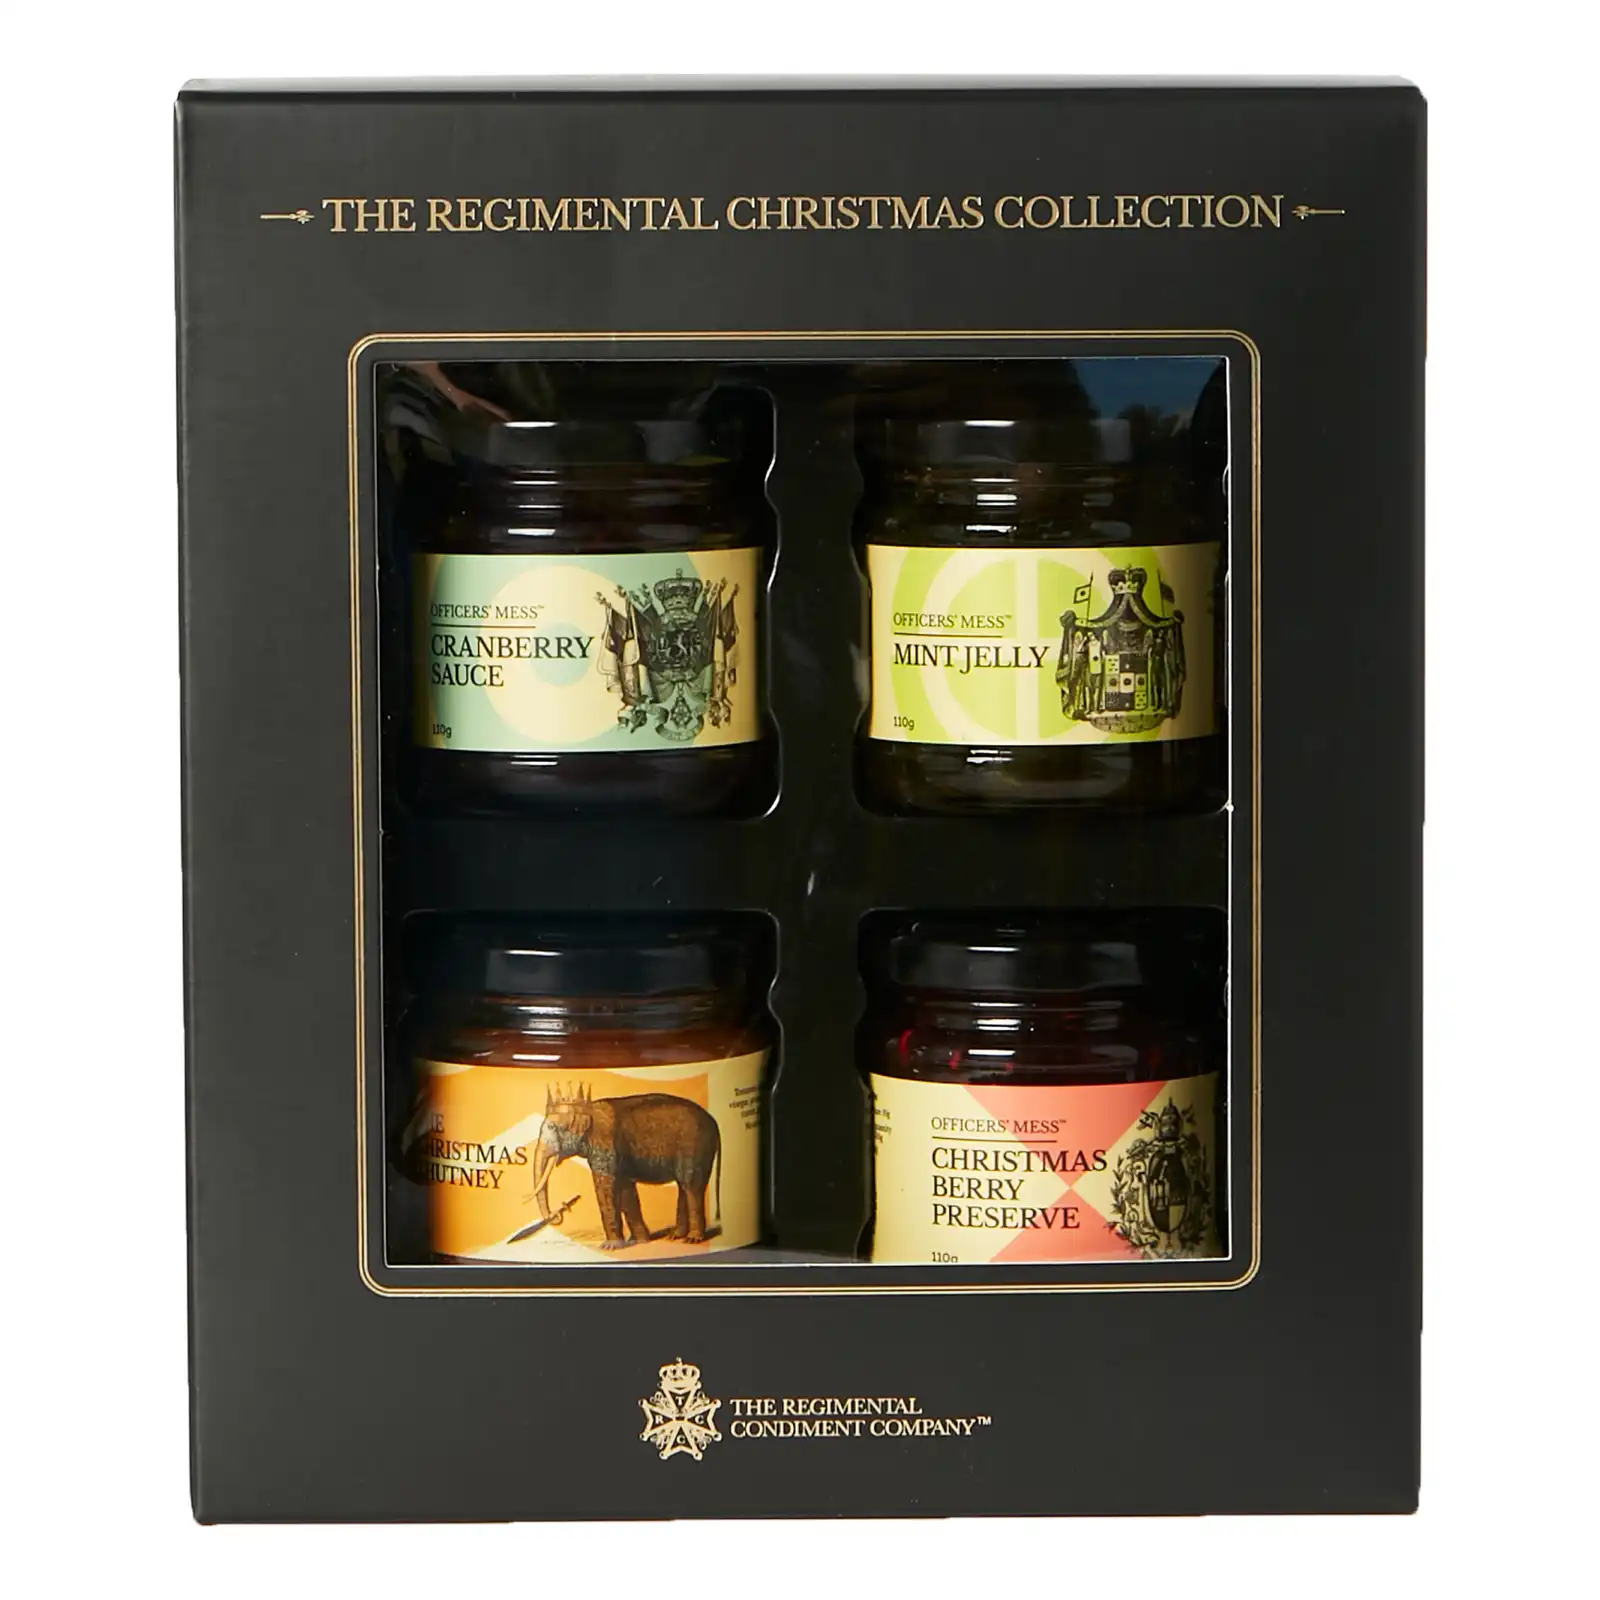 TRCC - The Regimental Christmas Collection - 4 Pack Christmas Collection